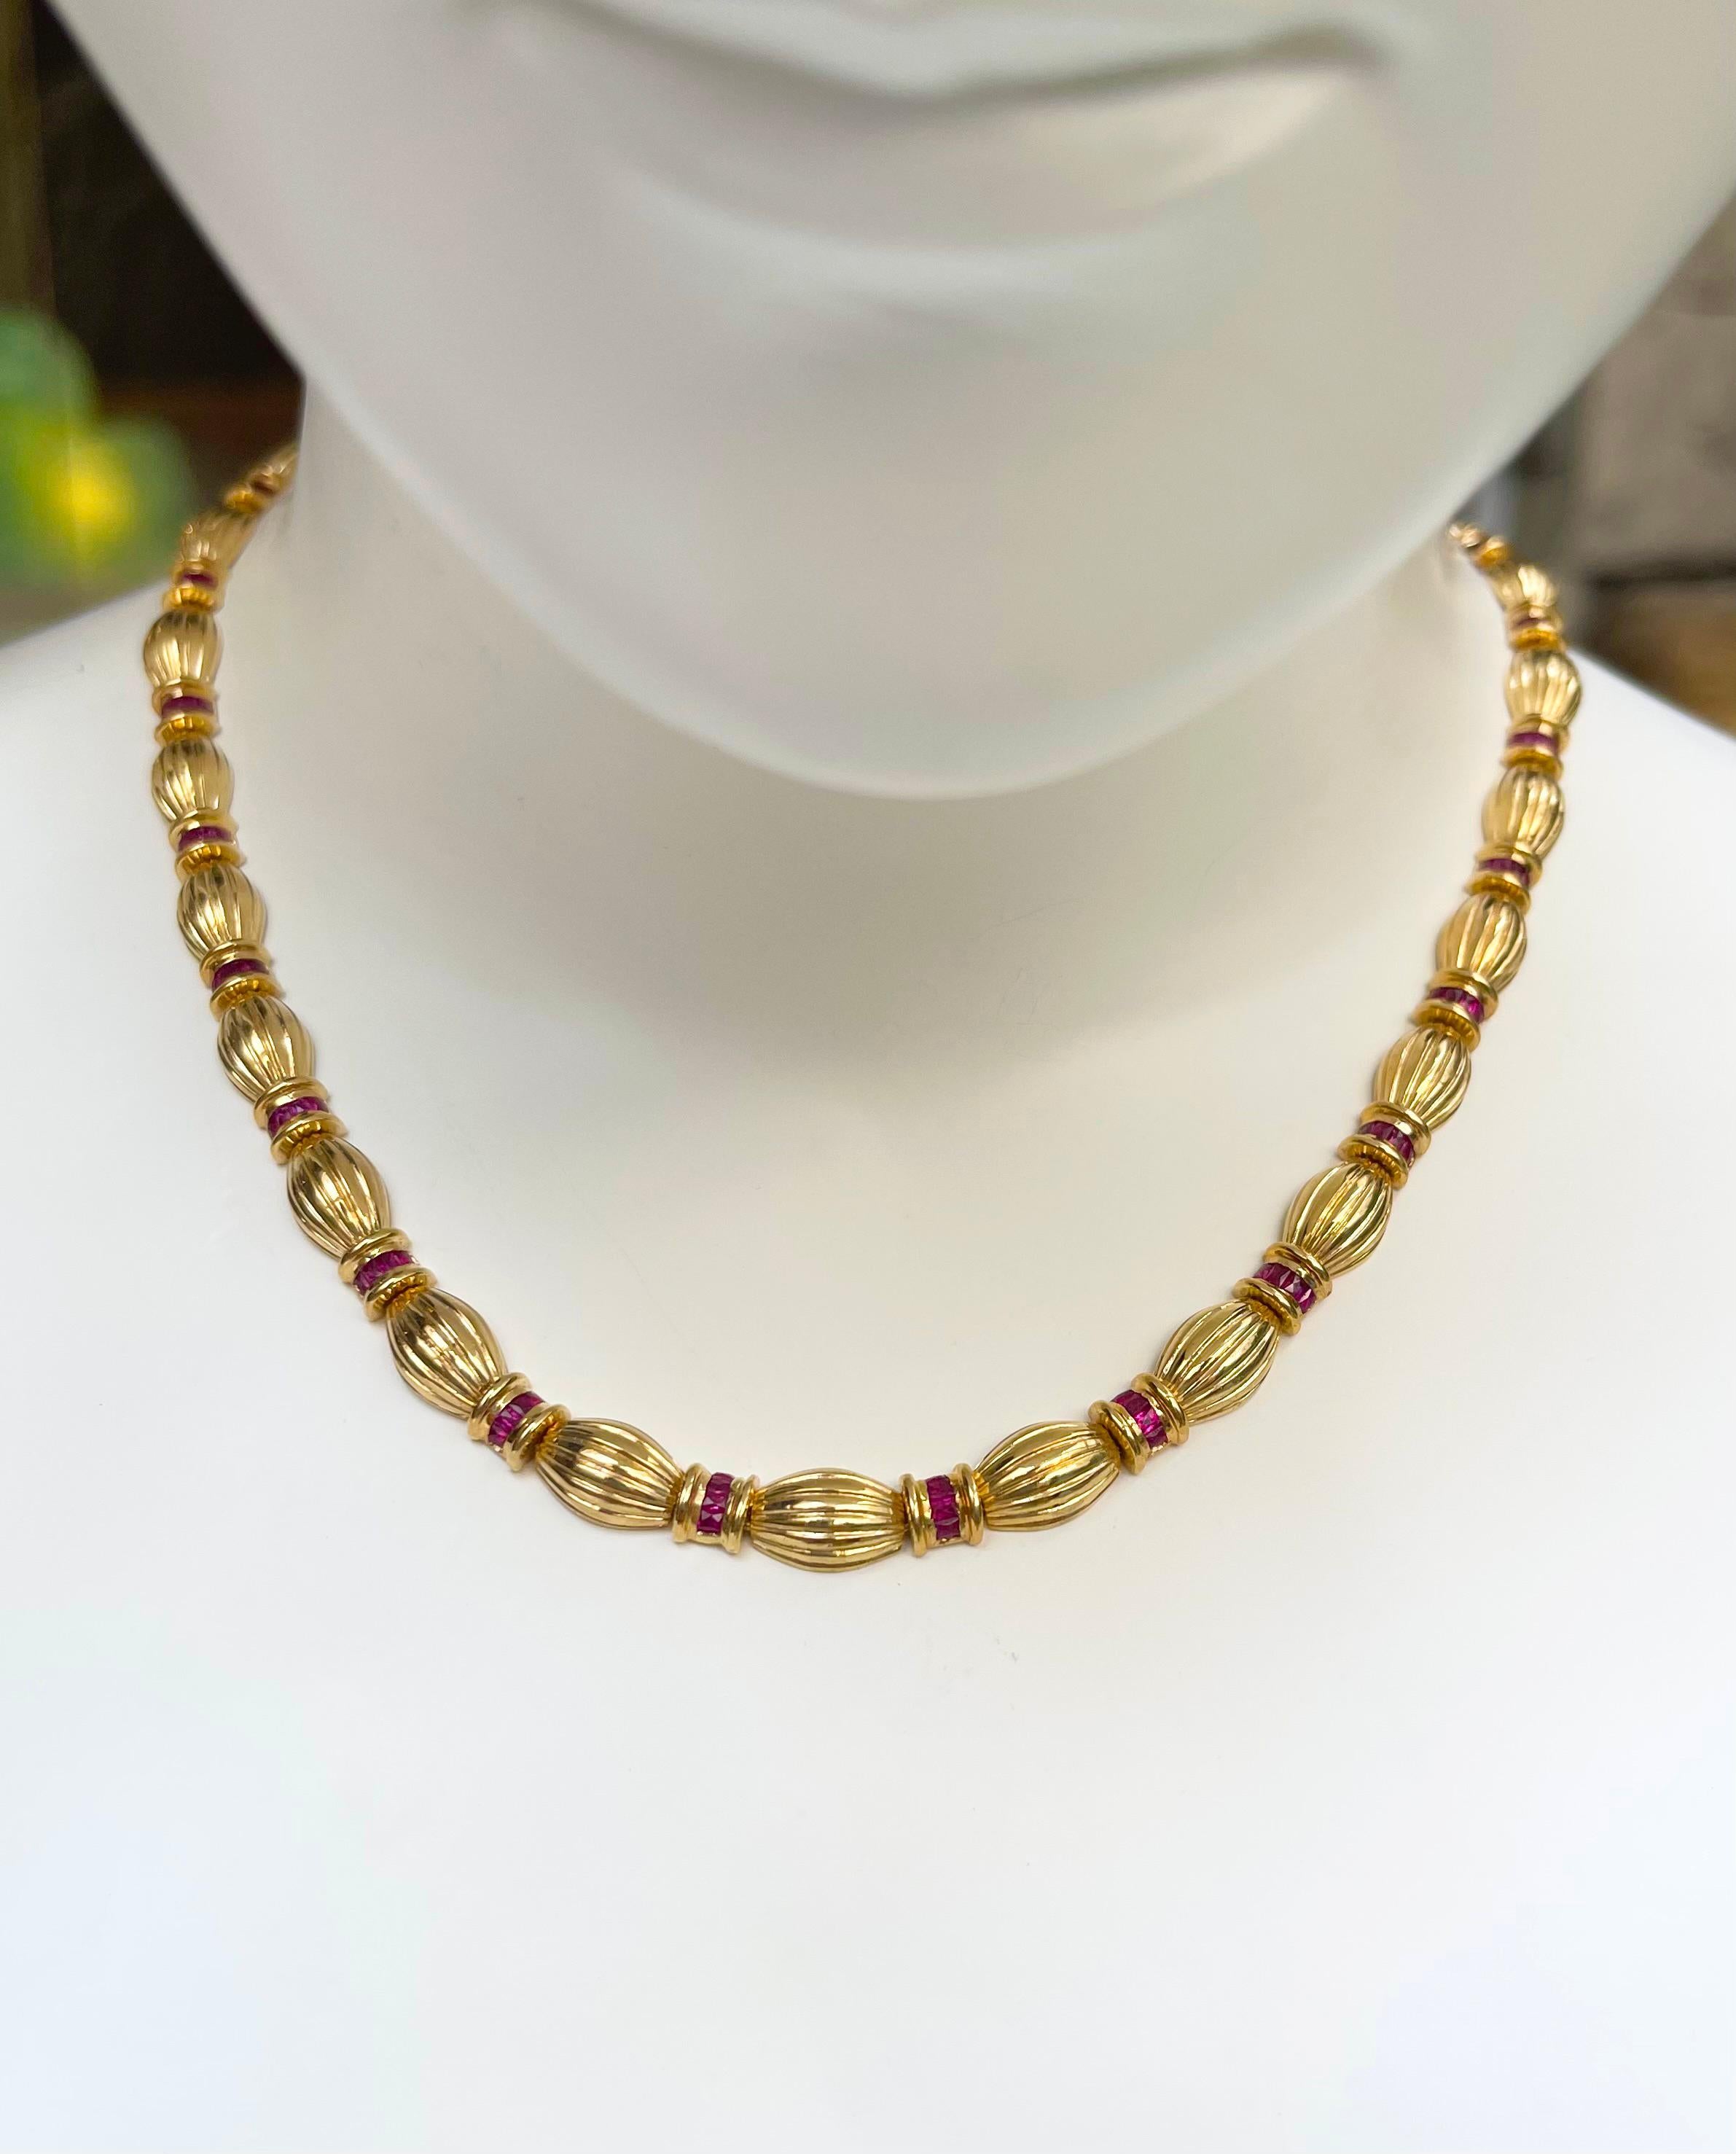 Ruby 6.36 carats Necklace set in 18K Gold Settings

Width: 0.7 cm 
Length: 42.0 cm
Total Weight: 53.04 grams

